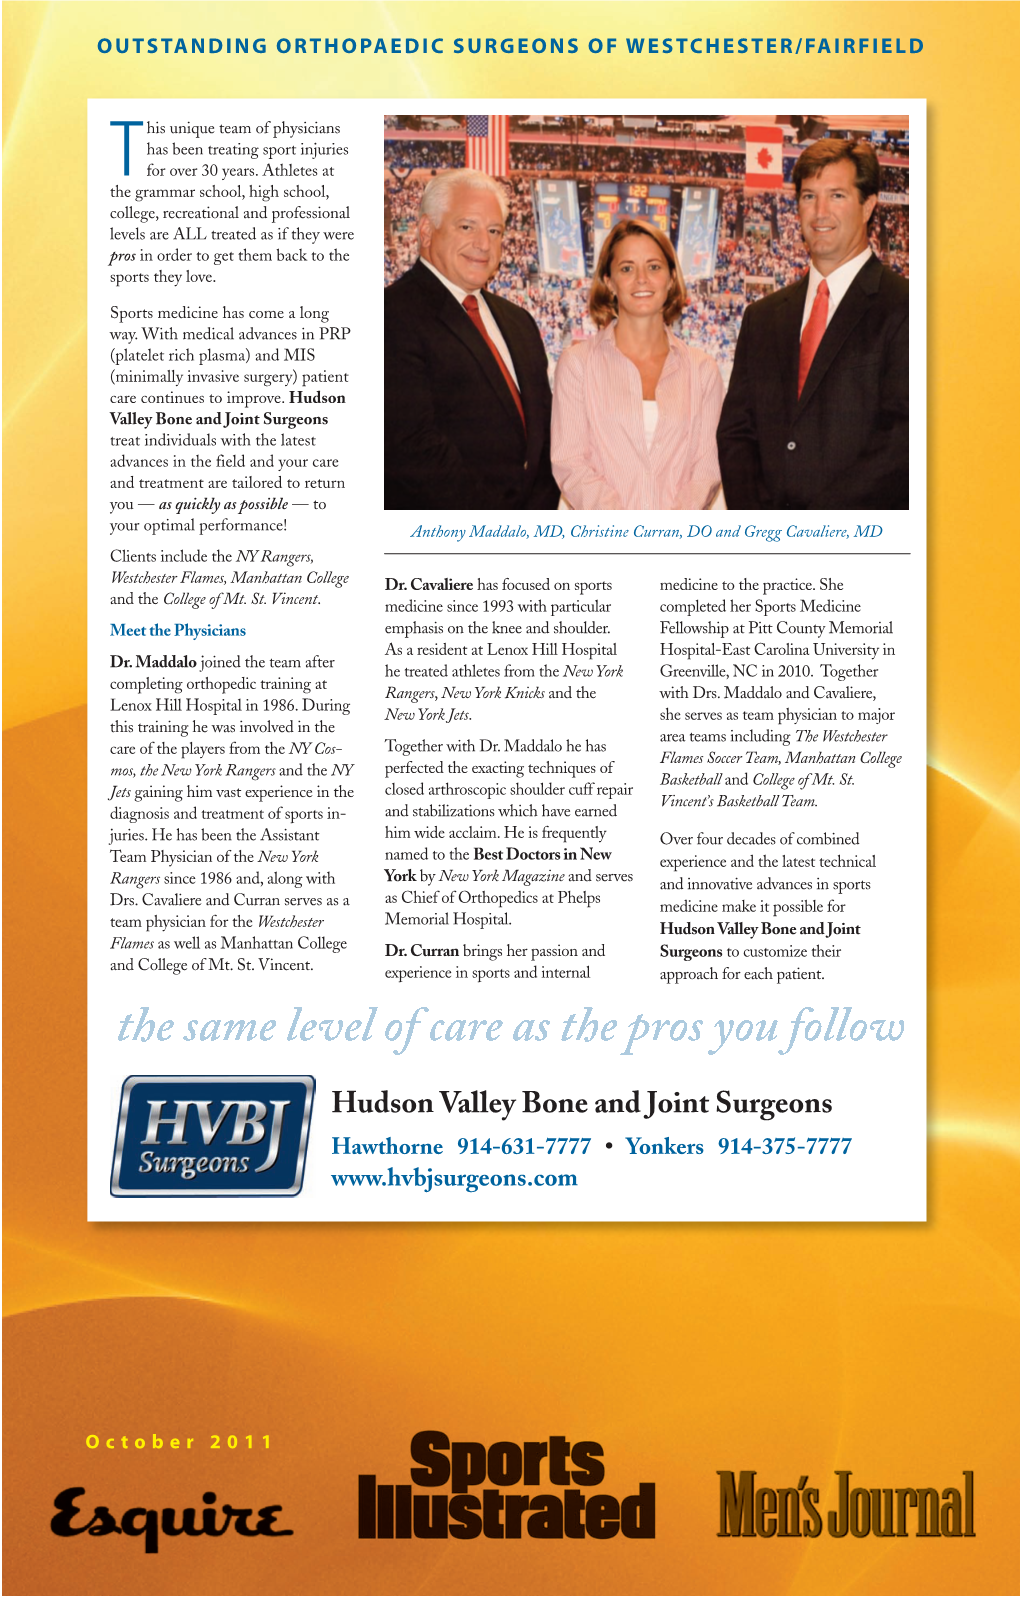 Hudson Valley Bone and Joint Surgeons